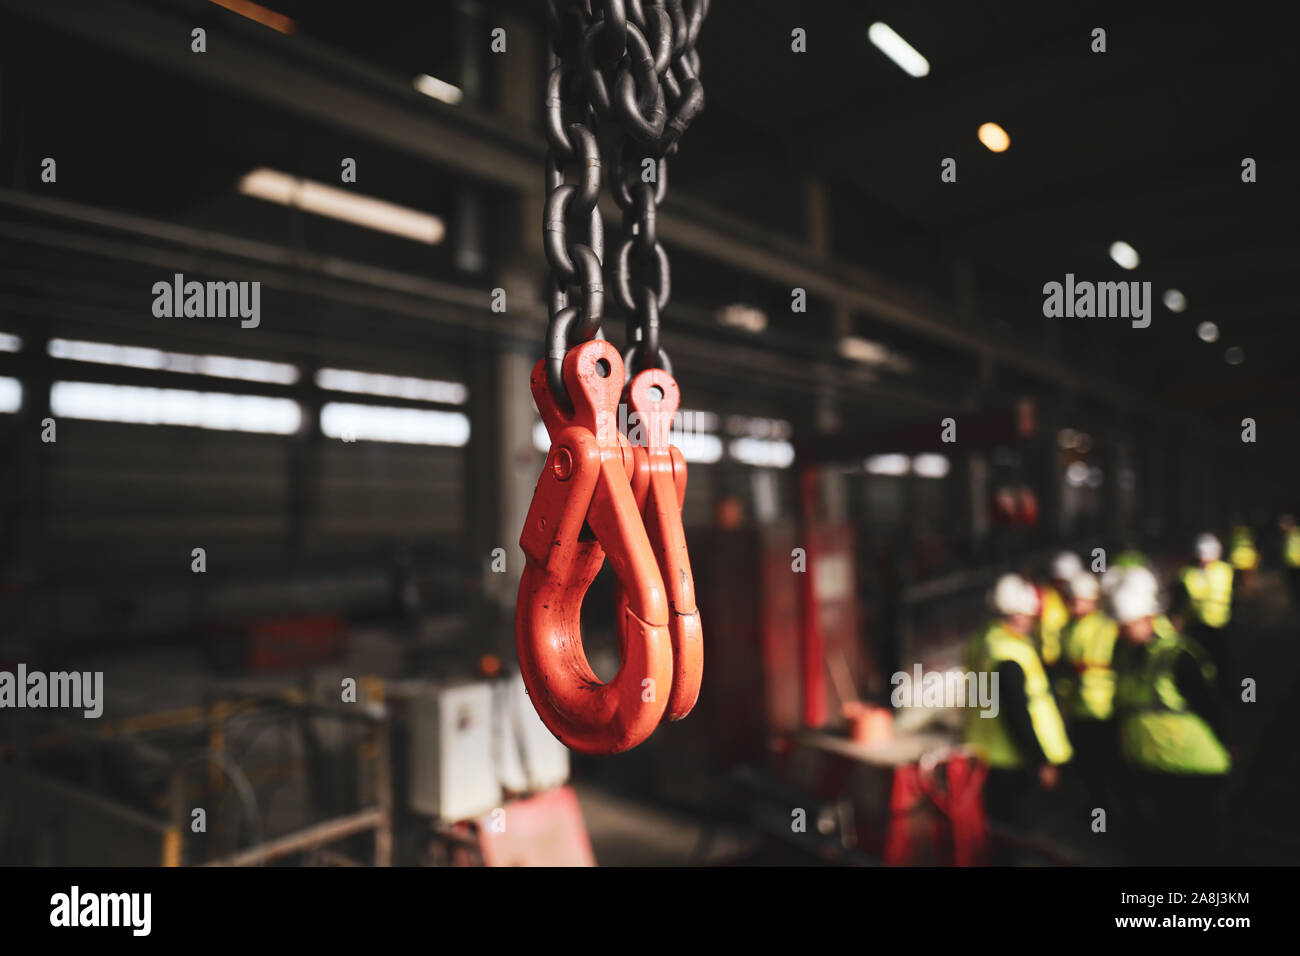 Shallow depth of field (selective focus) image with red industrial crane lifting hooks inside a factory. Stock Photo